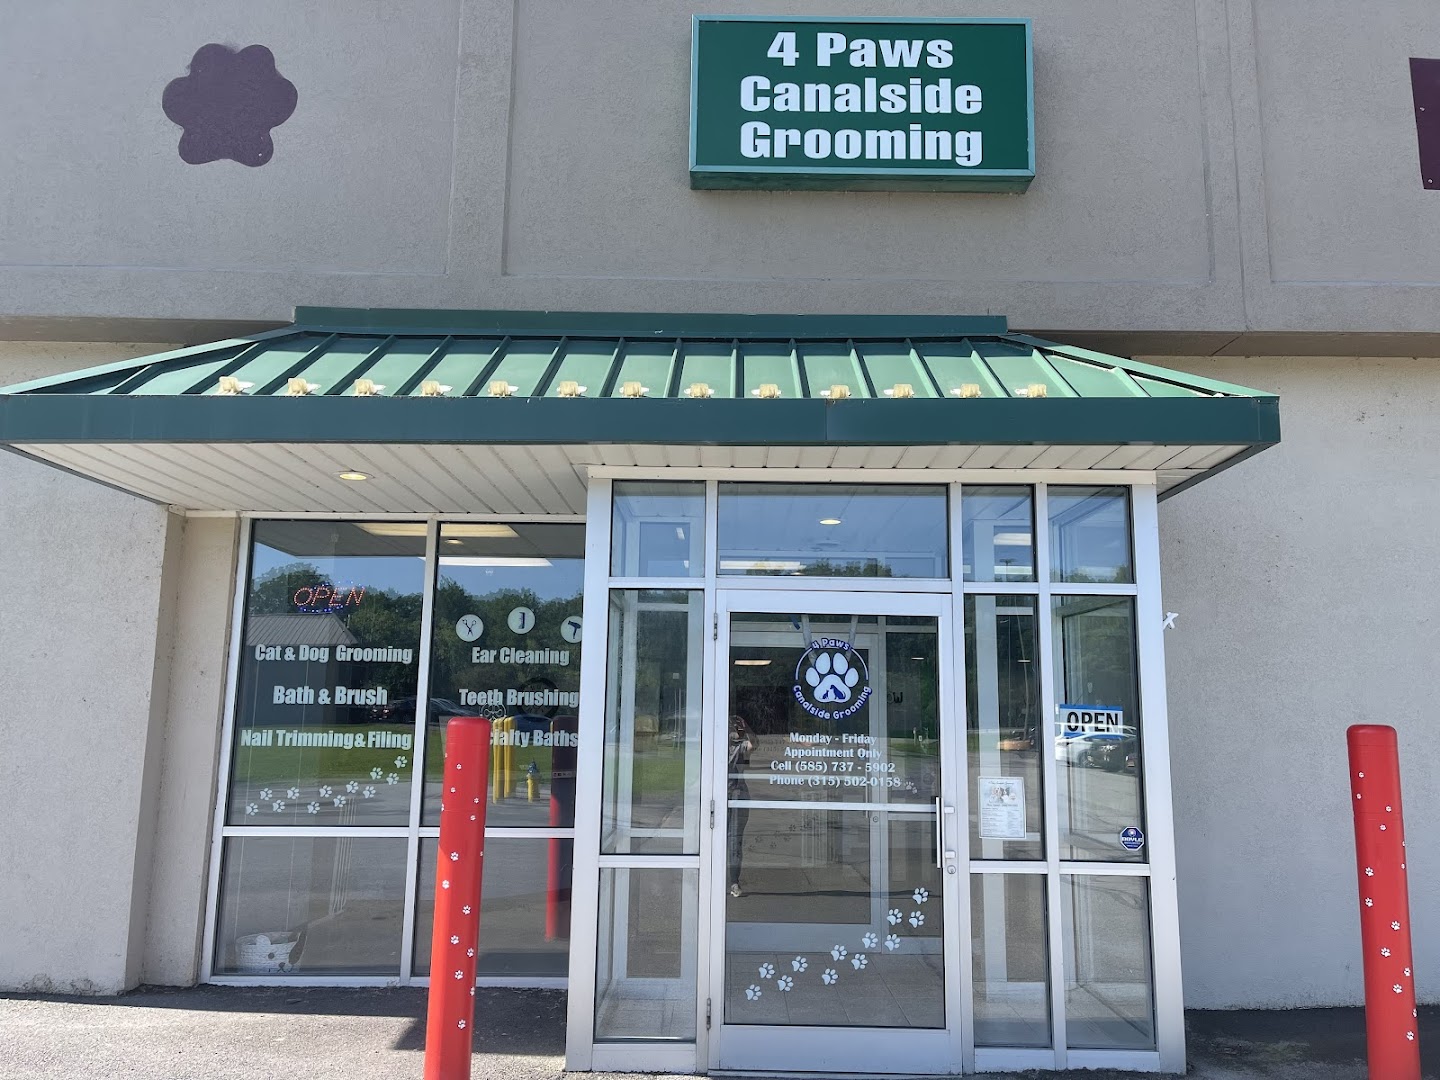 4 Paws Canalside Grooming